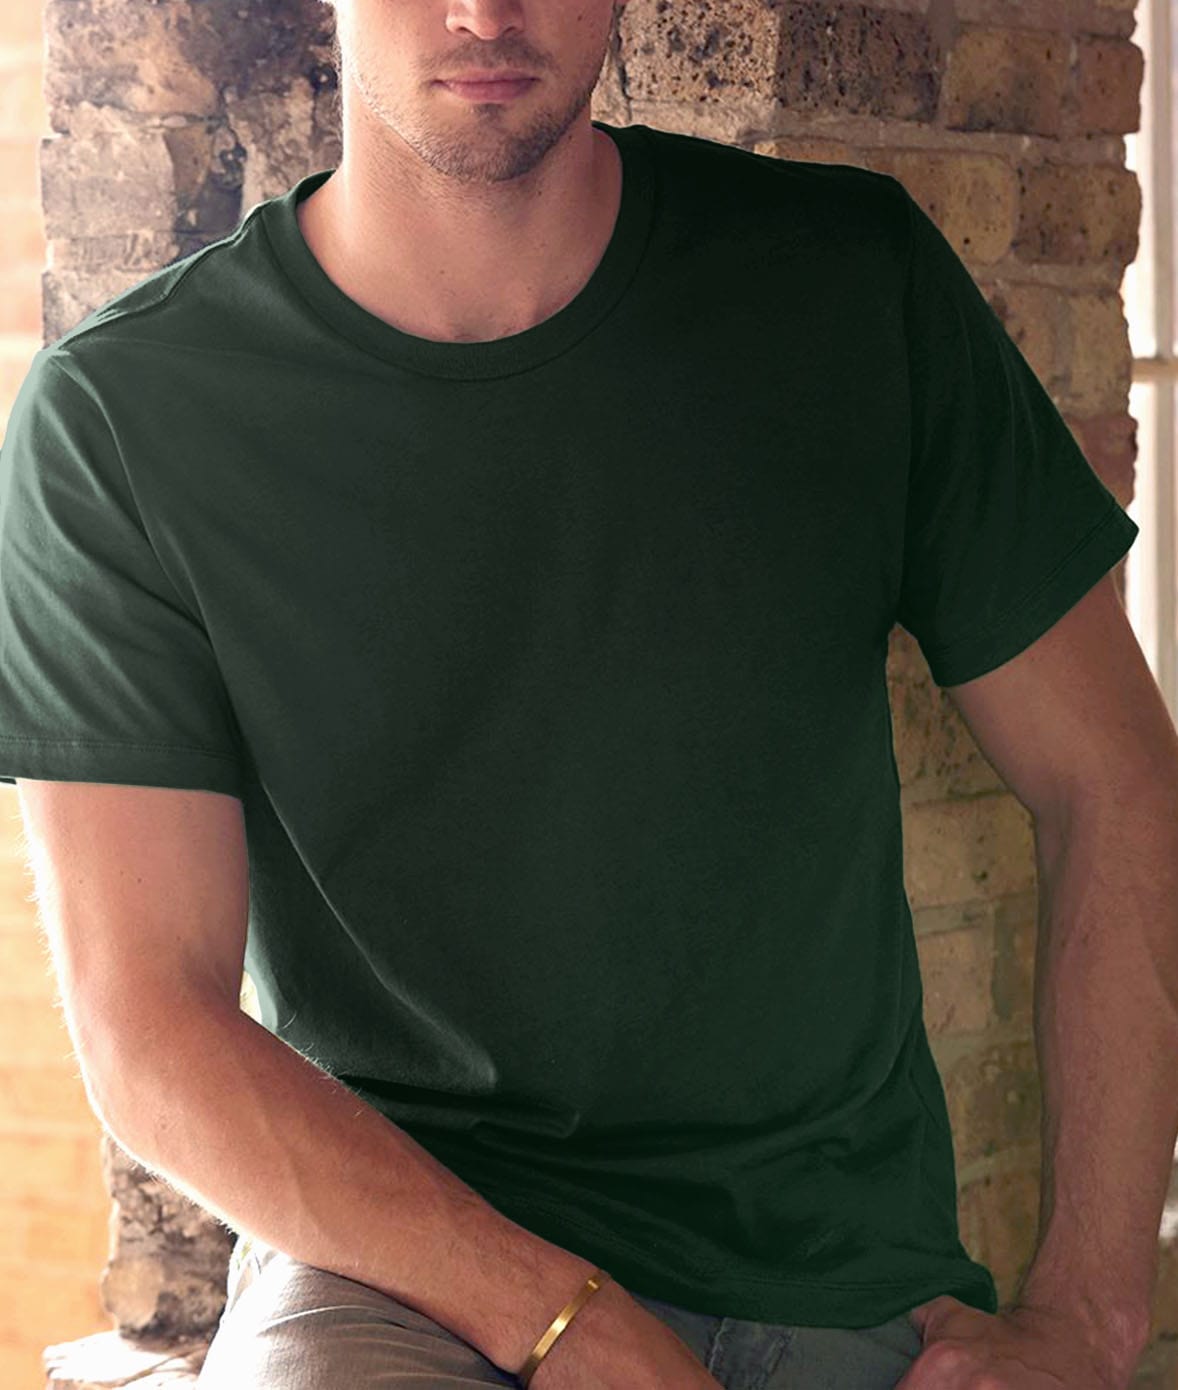 Men's Soft Garment Washed 100% Cotton Short Sleeve T-Shirt Worn by Model